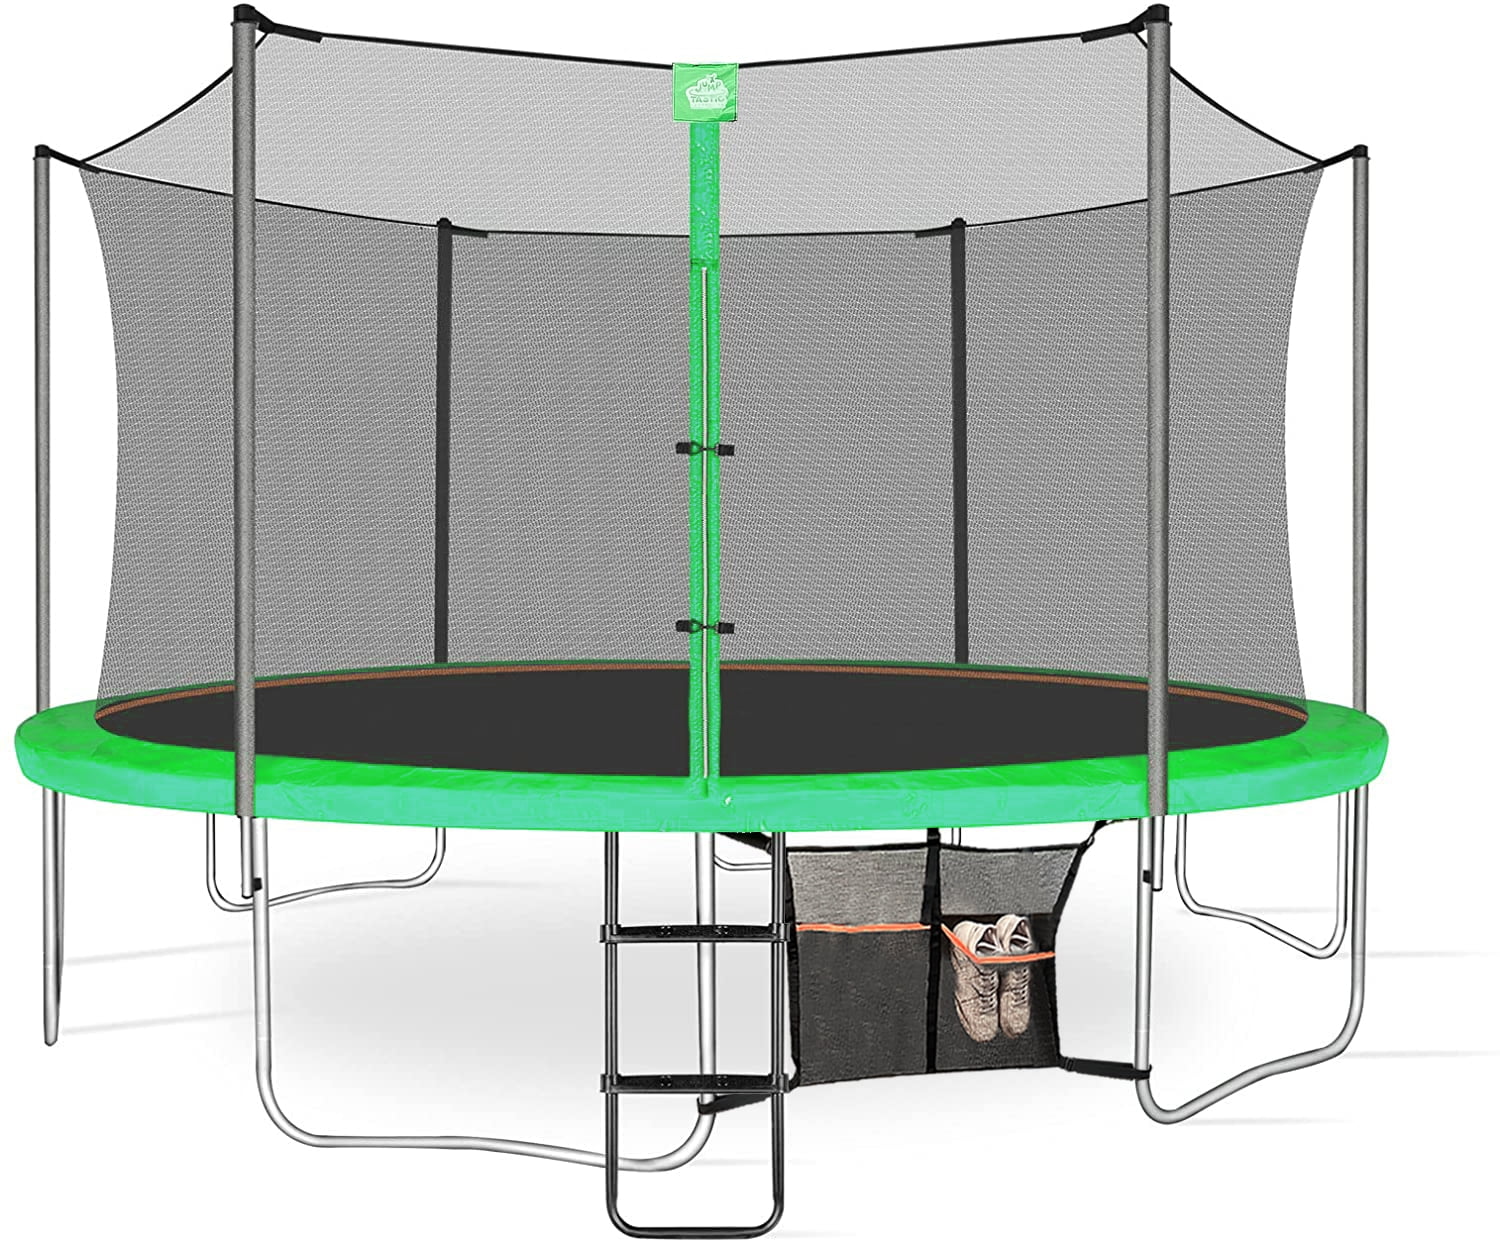 11 Trampoline Enclosure Safety Net Fits For 11' Round Frames Using 3 Arches NEW 